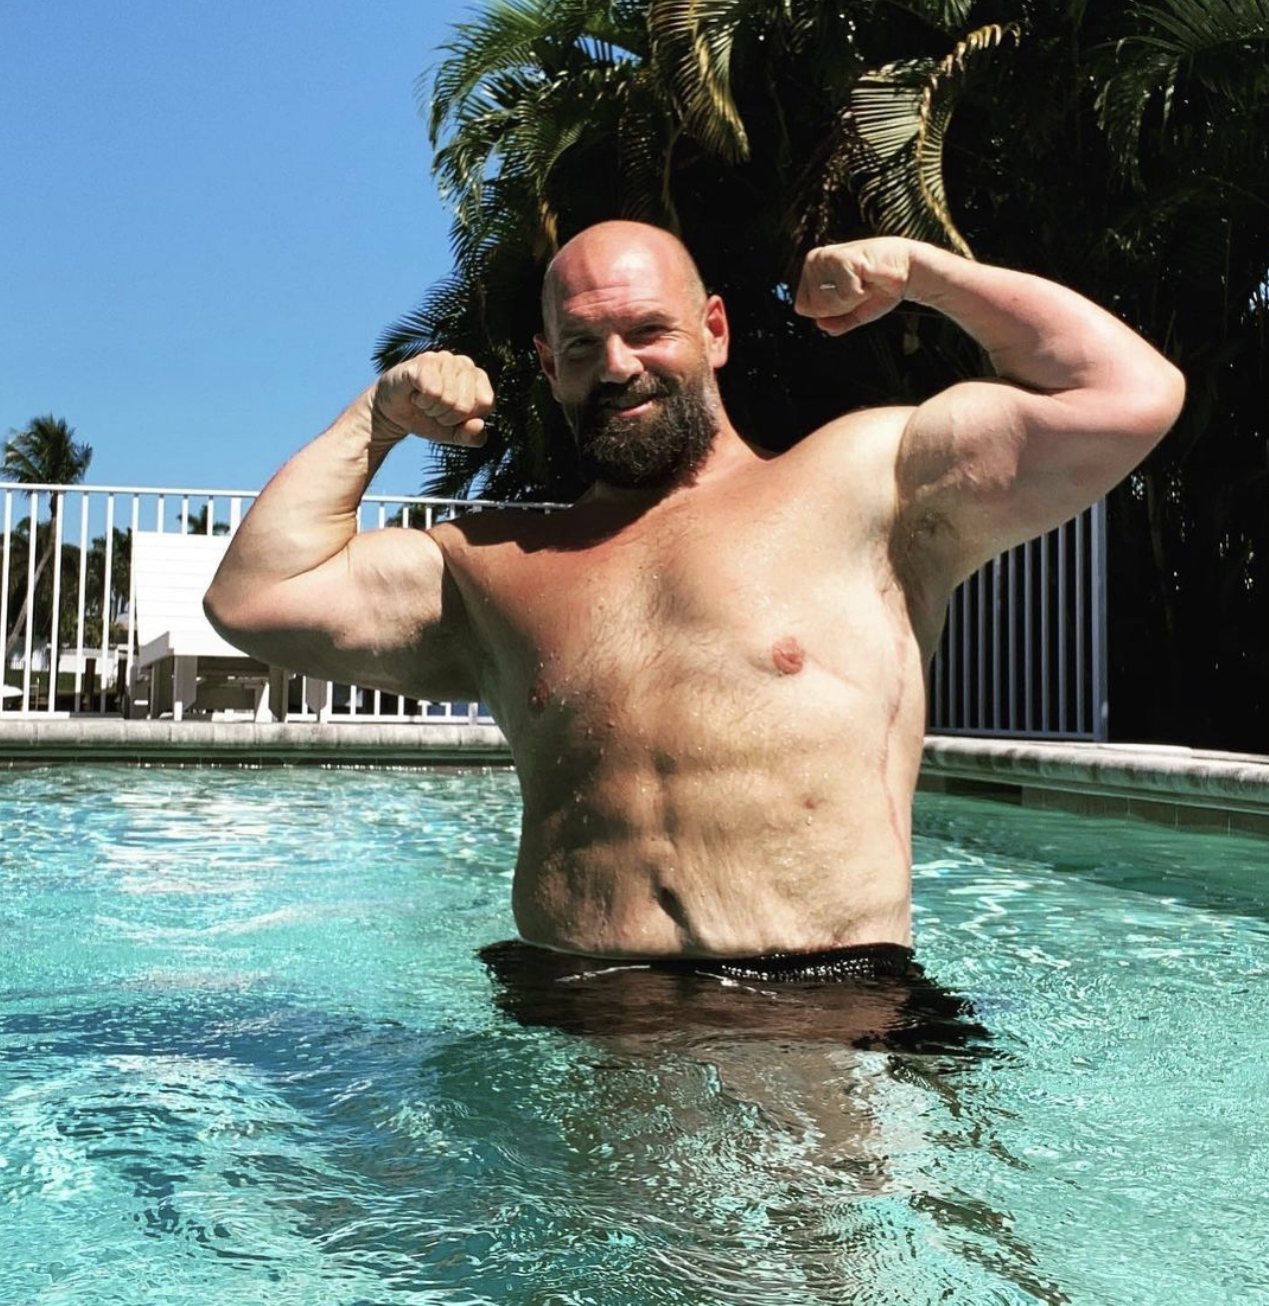 Ethan Suplee Shows Off His Physique in a Shirtless Pool Photo